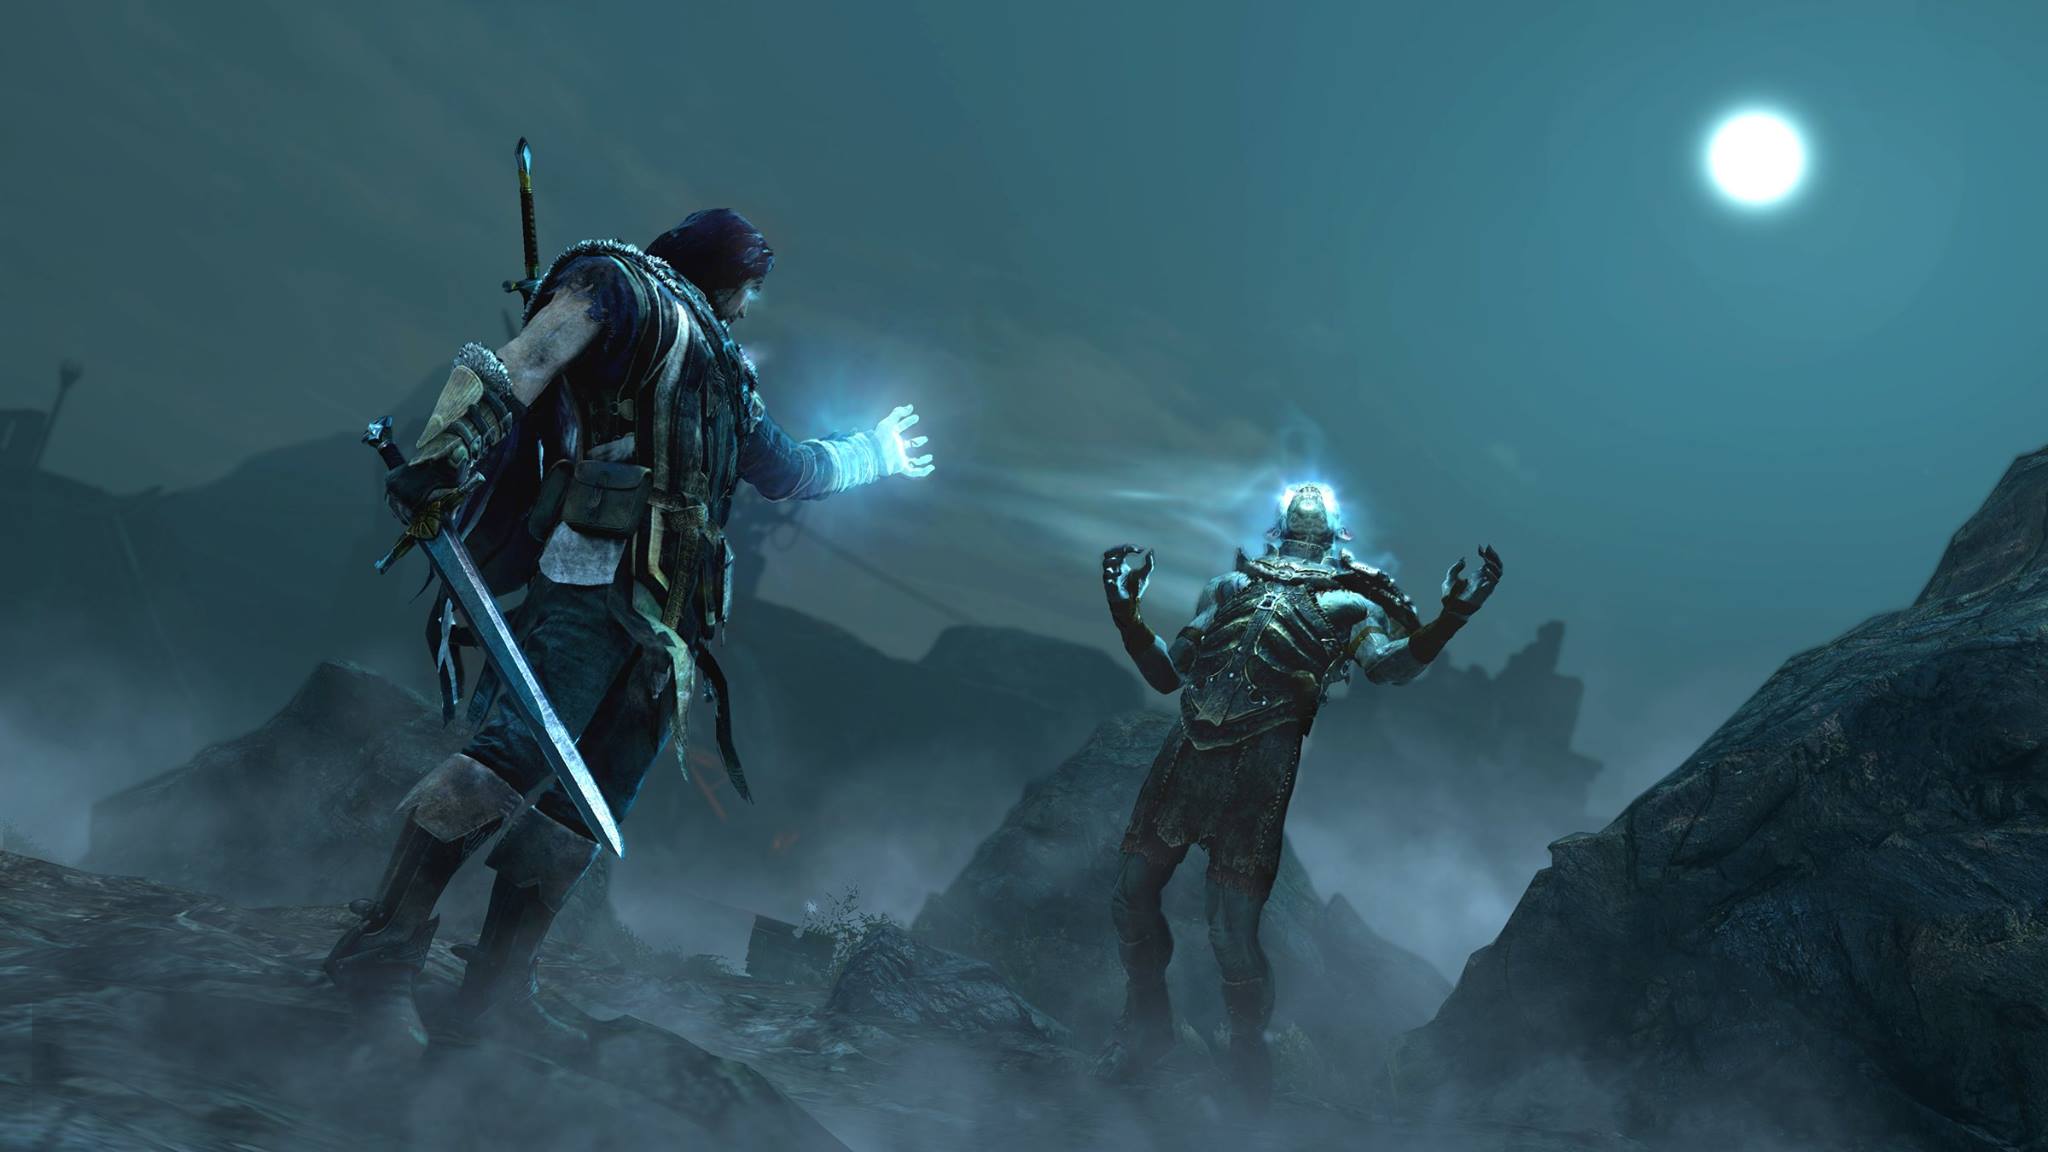 Shadow Of Mordor HD Wallpaper Mytechshout Ging